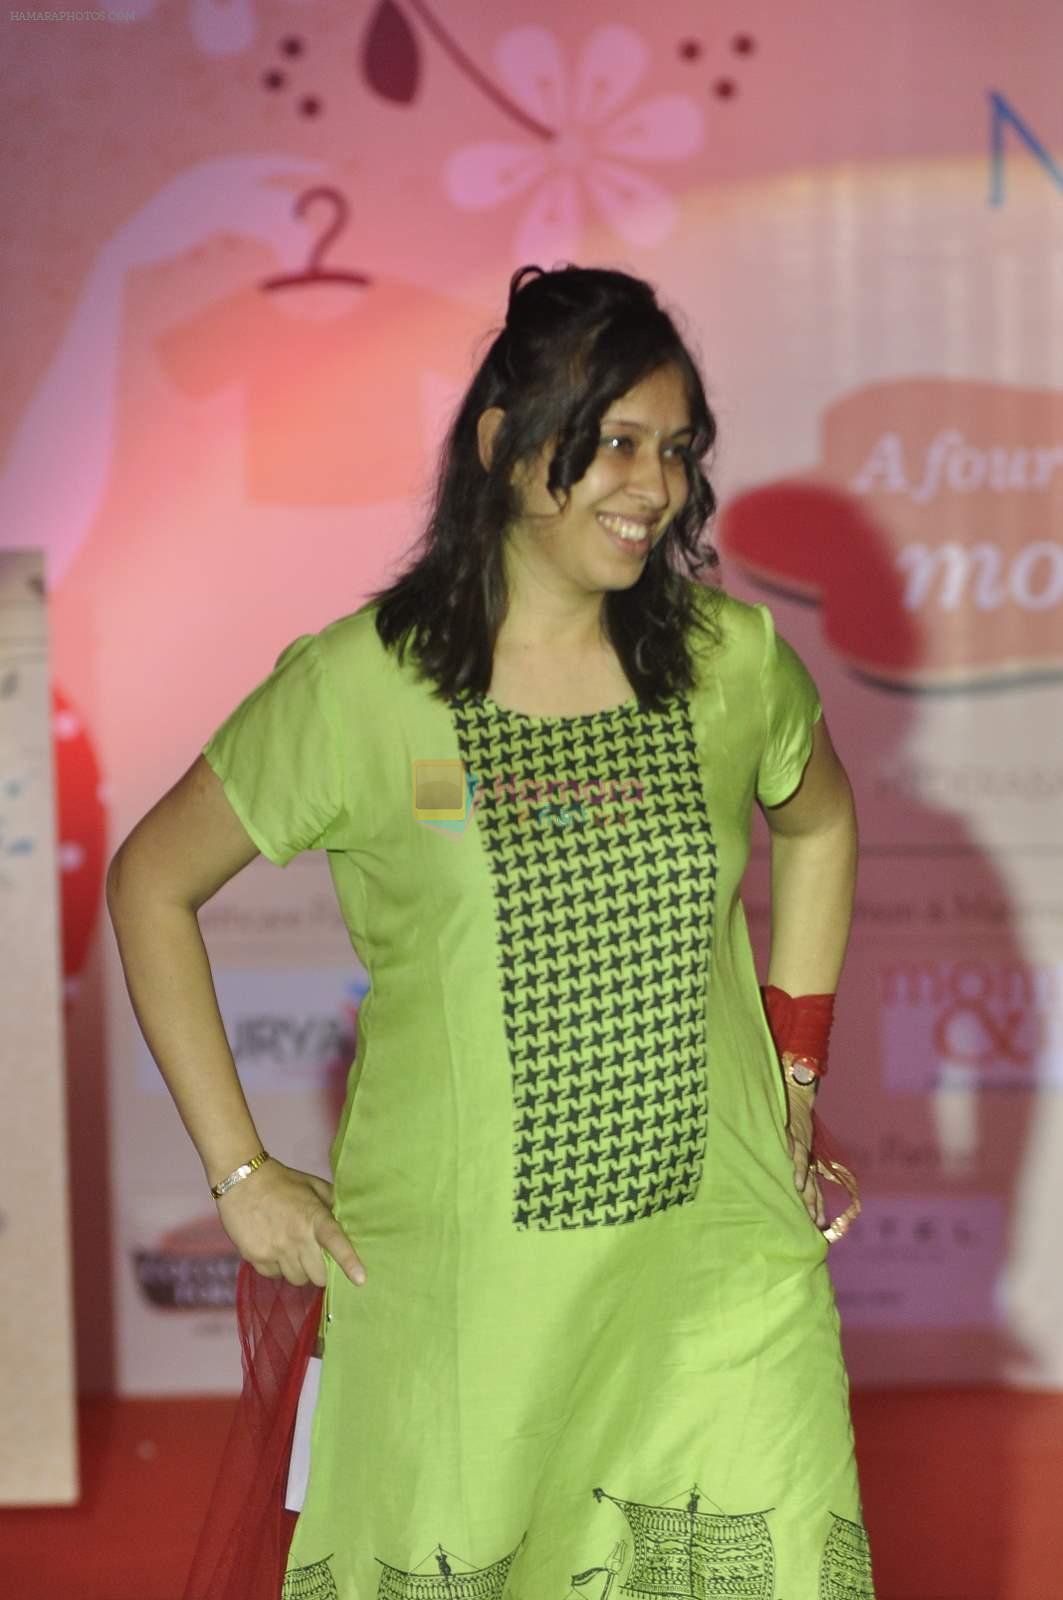 at Pregnant Ladies fashion show in Bandra, Mumbai on 15th March 2015